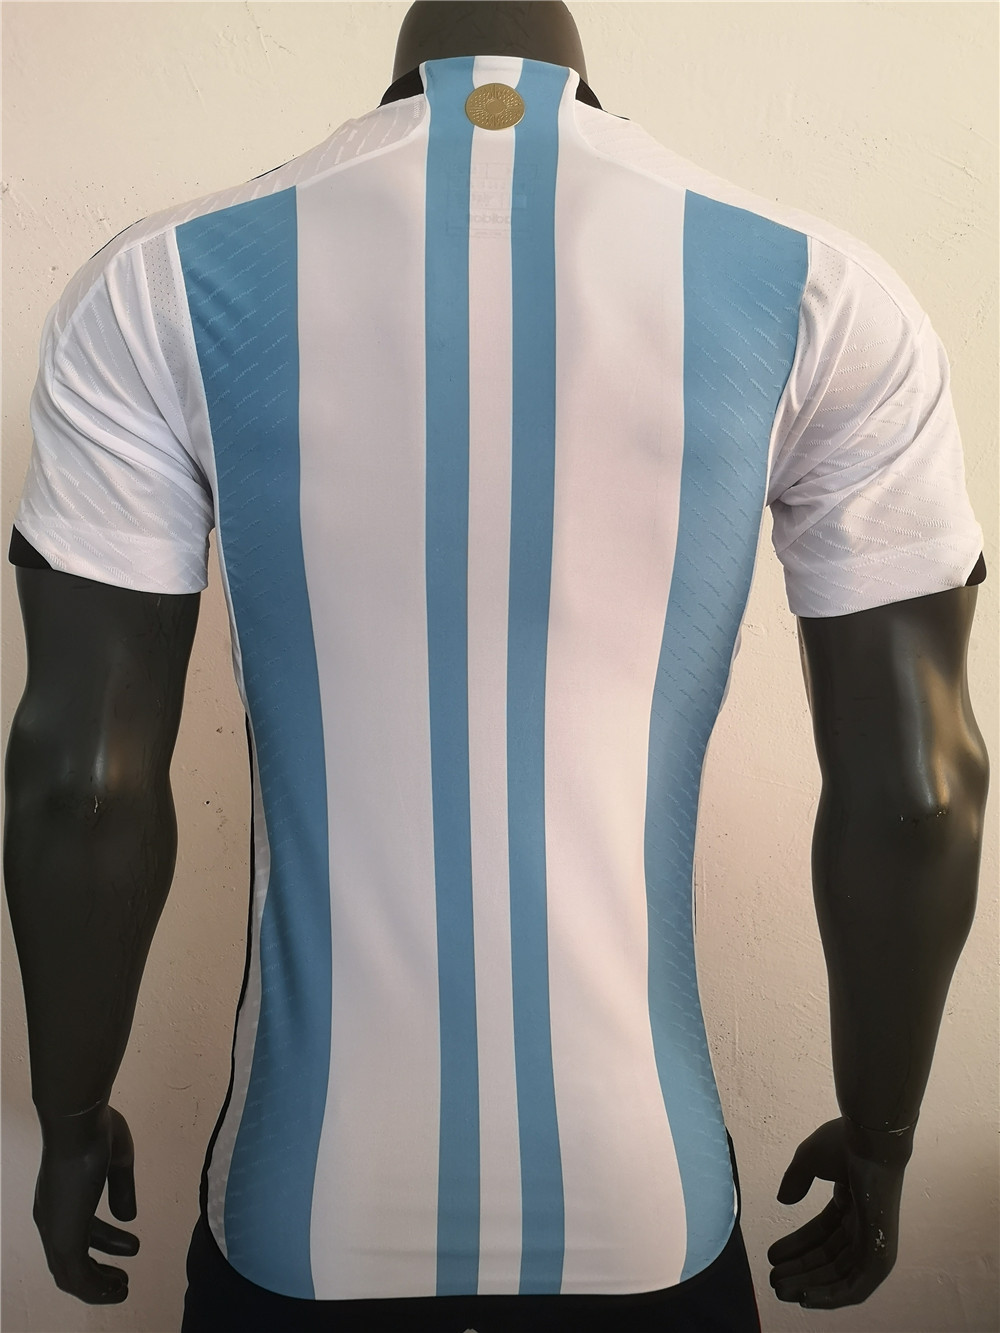 Argentina Soccer Jersey Replica Home Mens 2022 FIFA World Cup Qatar (Player Version)